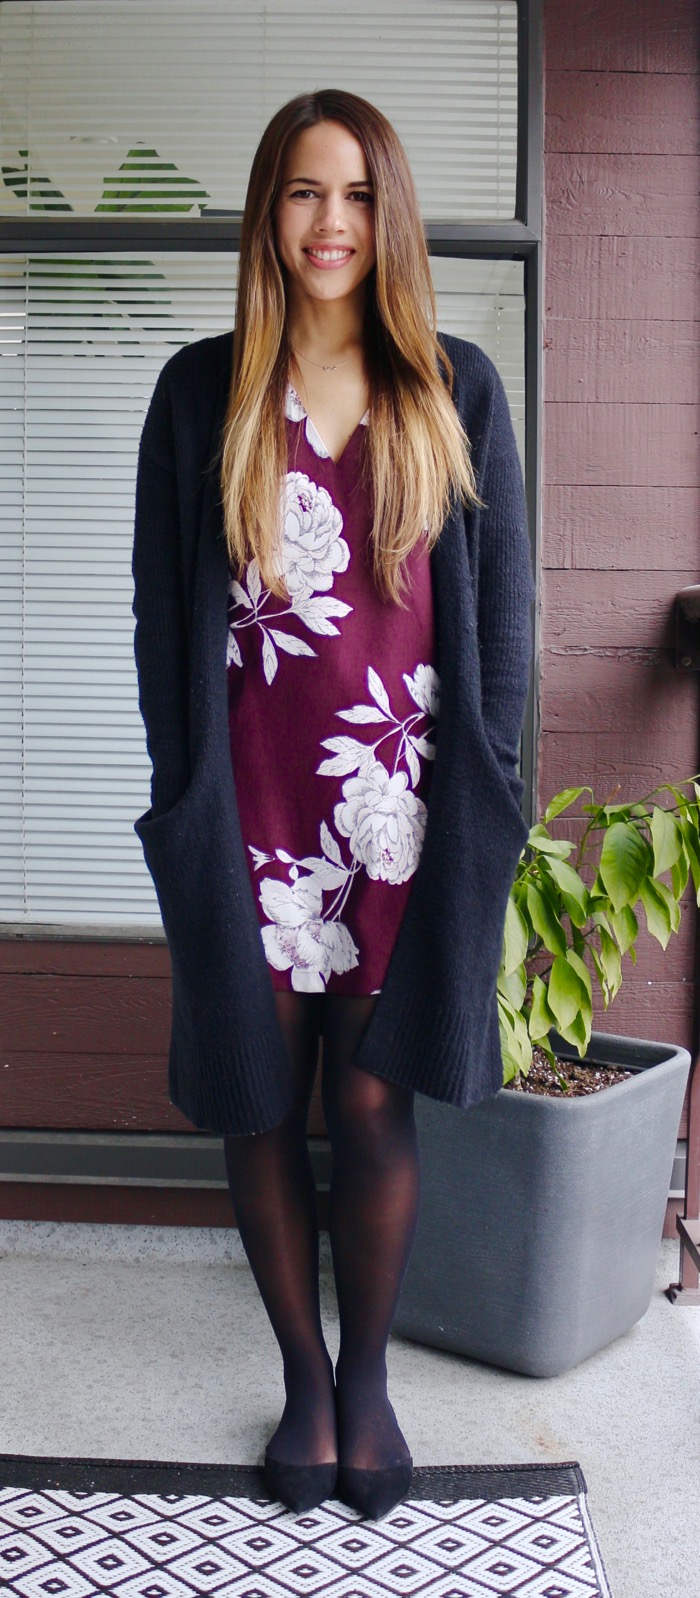 Jules in Flats - Floral Shift Dress with Long Cardigan for Work